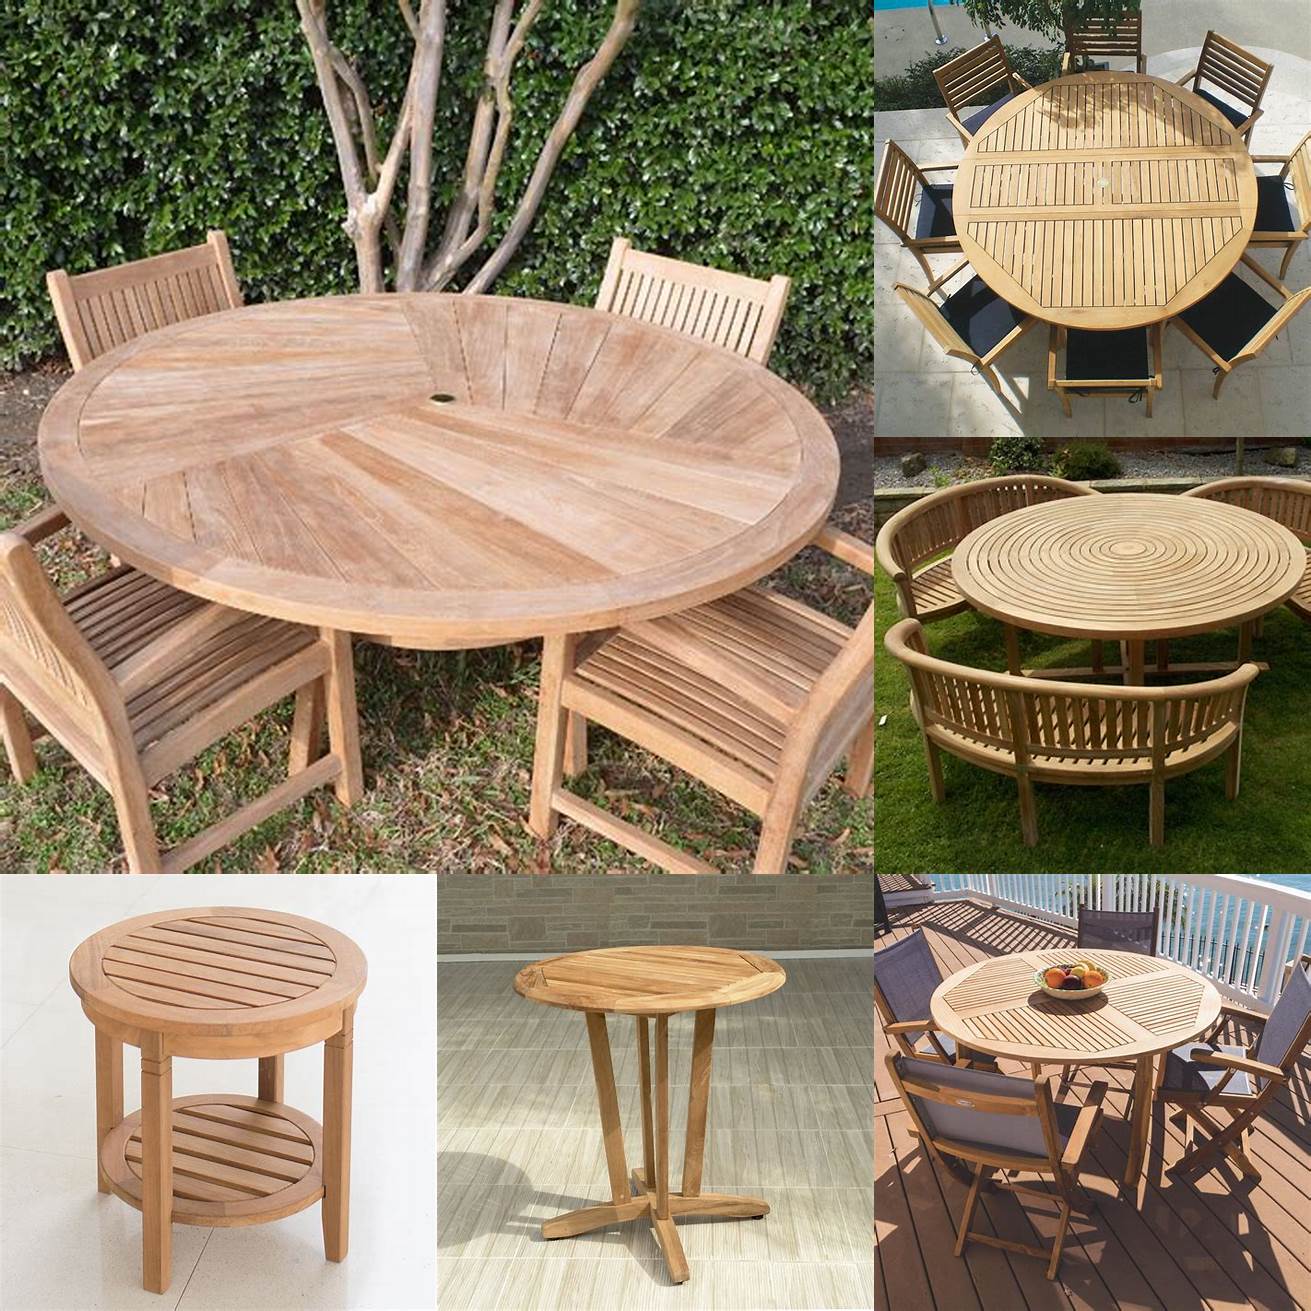 Cup Holder Teak Patio Furniture Round Table